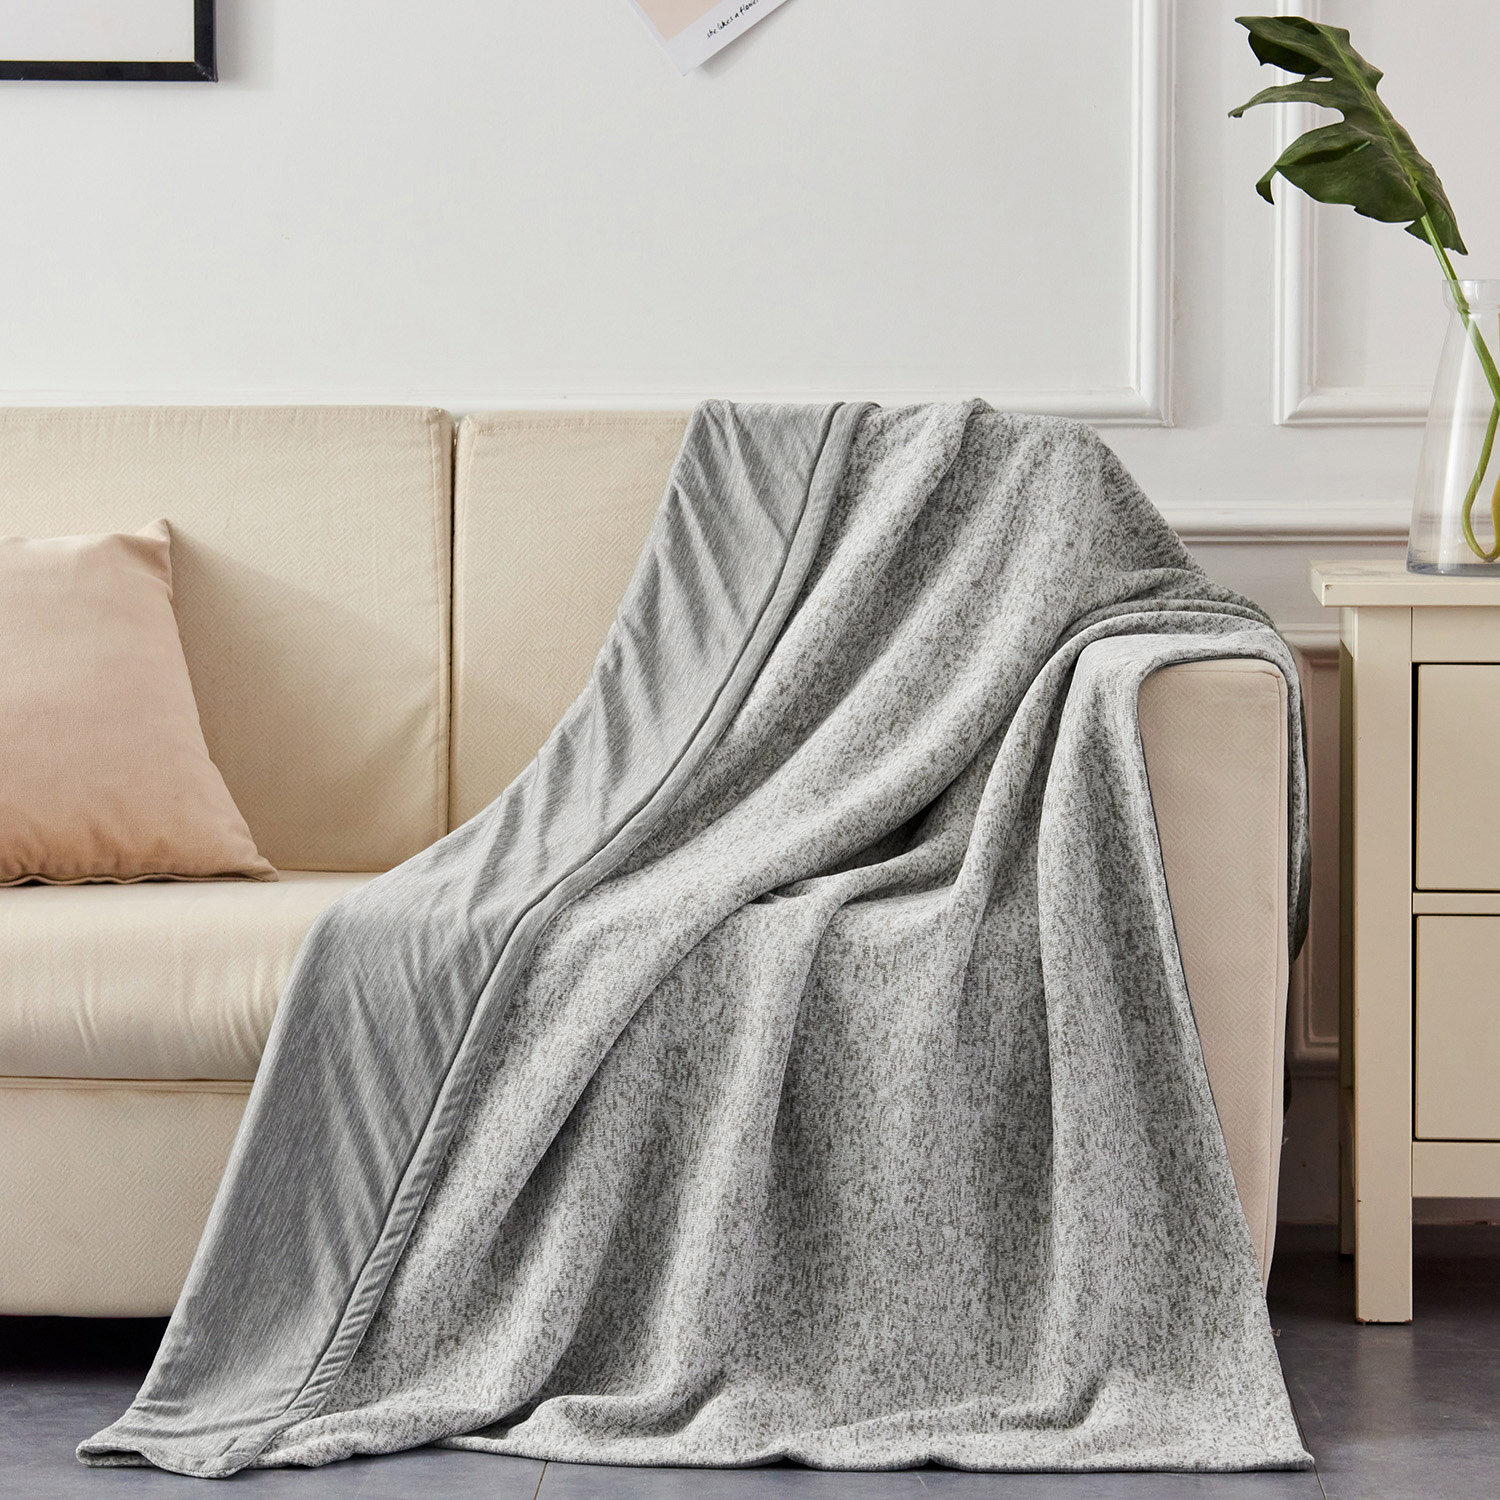 Cooling Blanket for Summer Jml Color: Gray, Size: Twin